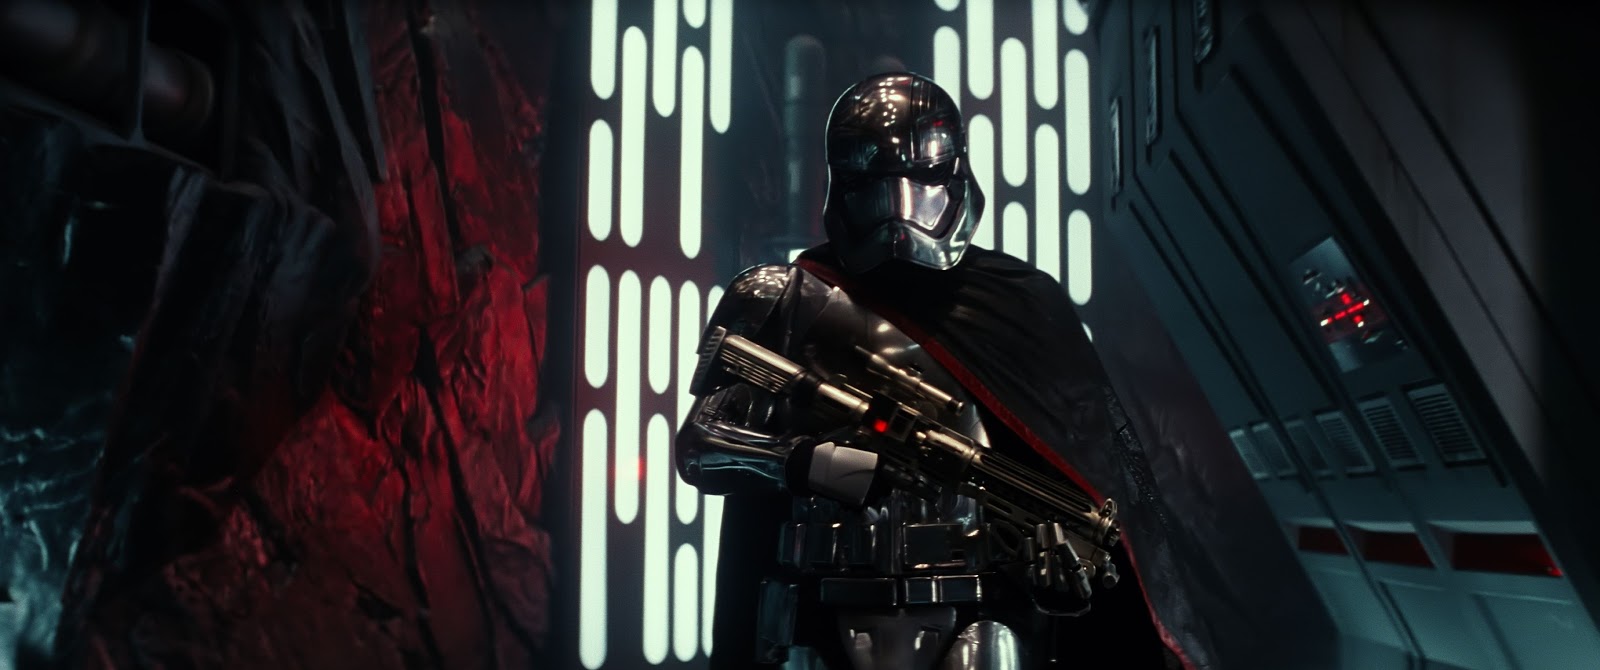 What We Thought About Star Wars: The Force Awakens